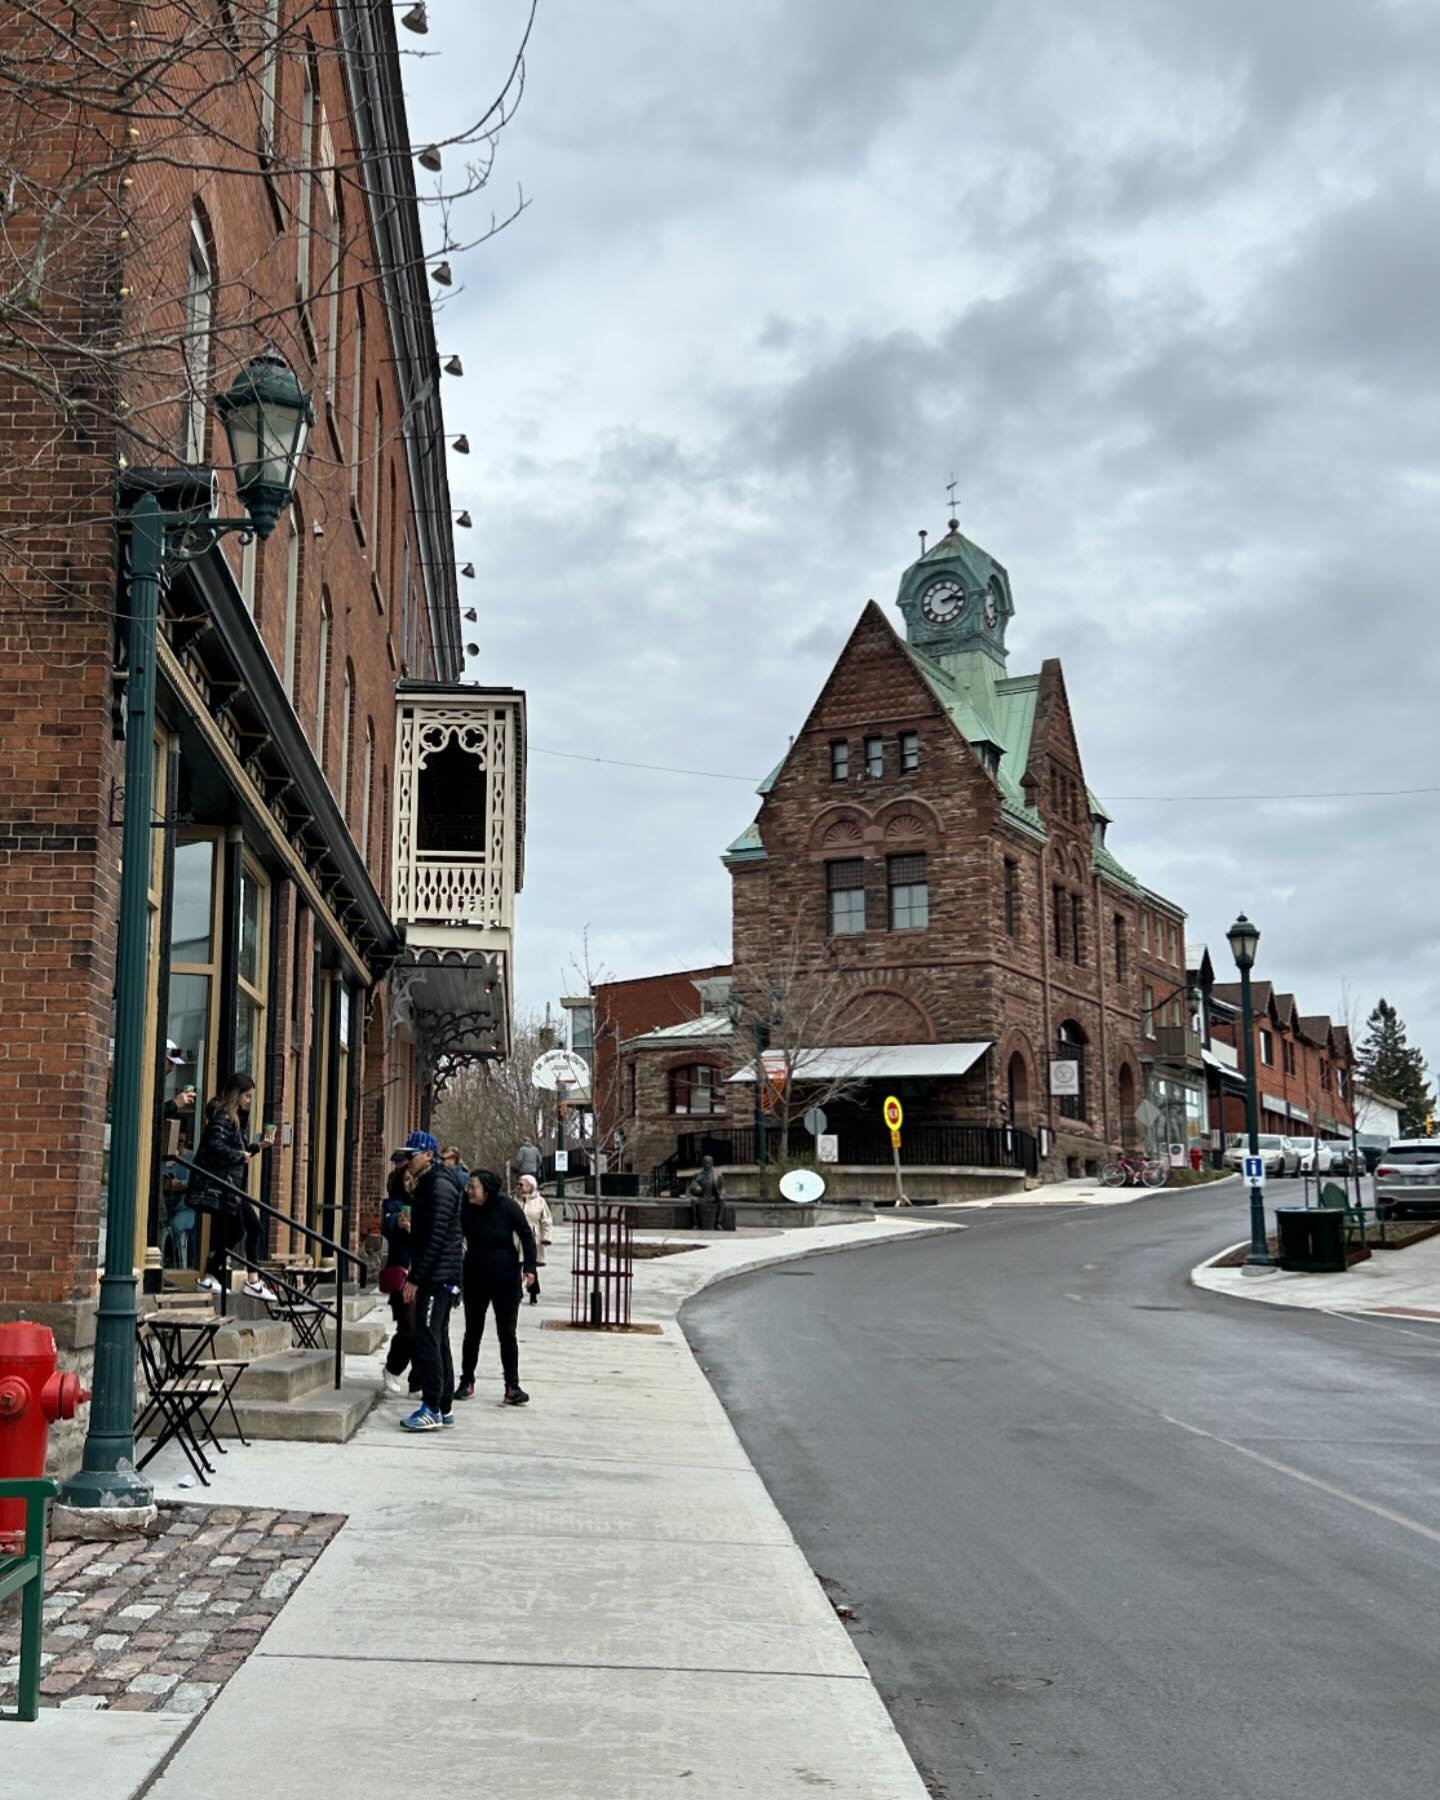 We did a little daytrip to Almonte (a thing we&rsquo;ve been meaning to do for&hellip;years) &amp; what a lovely little town! It&rsquo;s absolutely stuffed with antique/vintage shops &amp; has some cute little restaurants (we had lunch at @northmarke